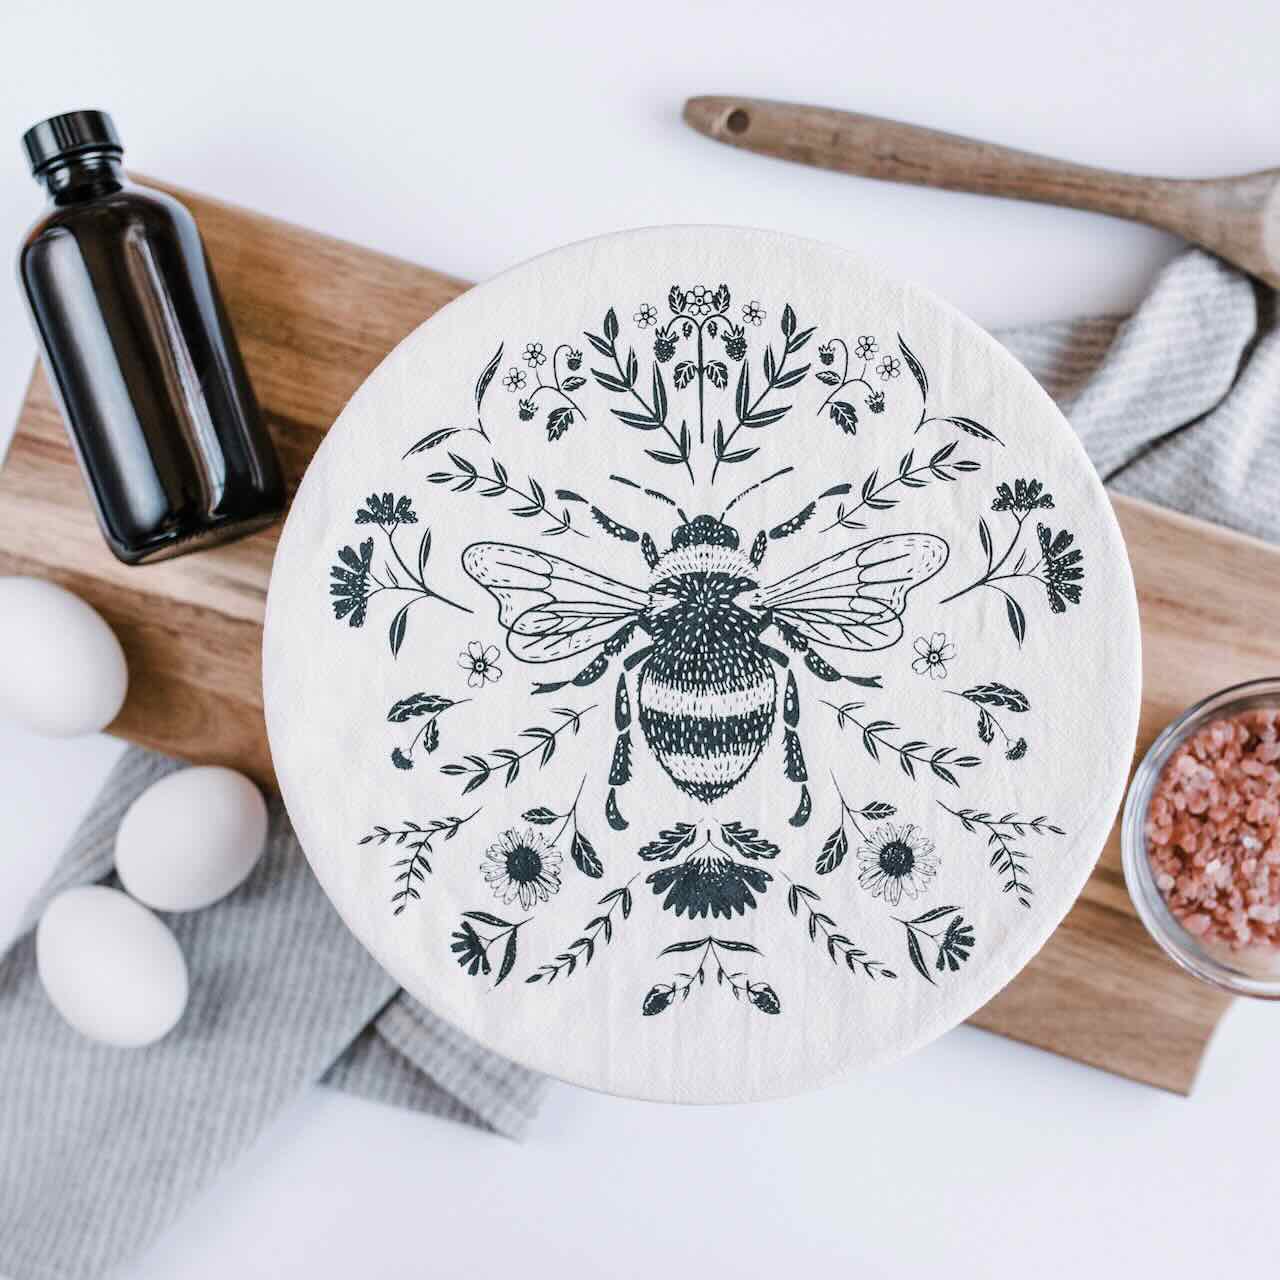 Waxed Reusable Fabric Bowl Cover: Charcoal Bee - Large 10"